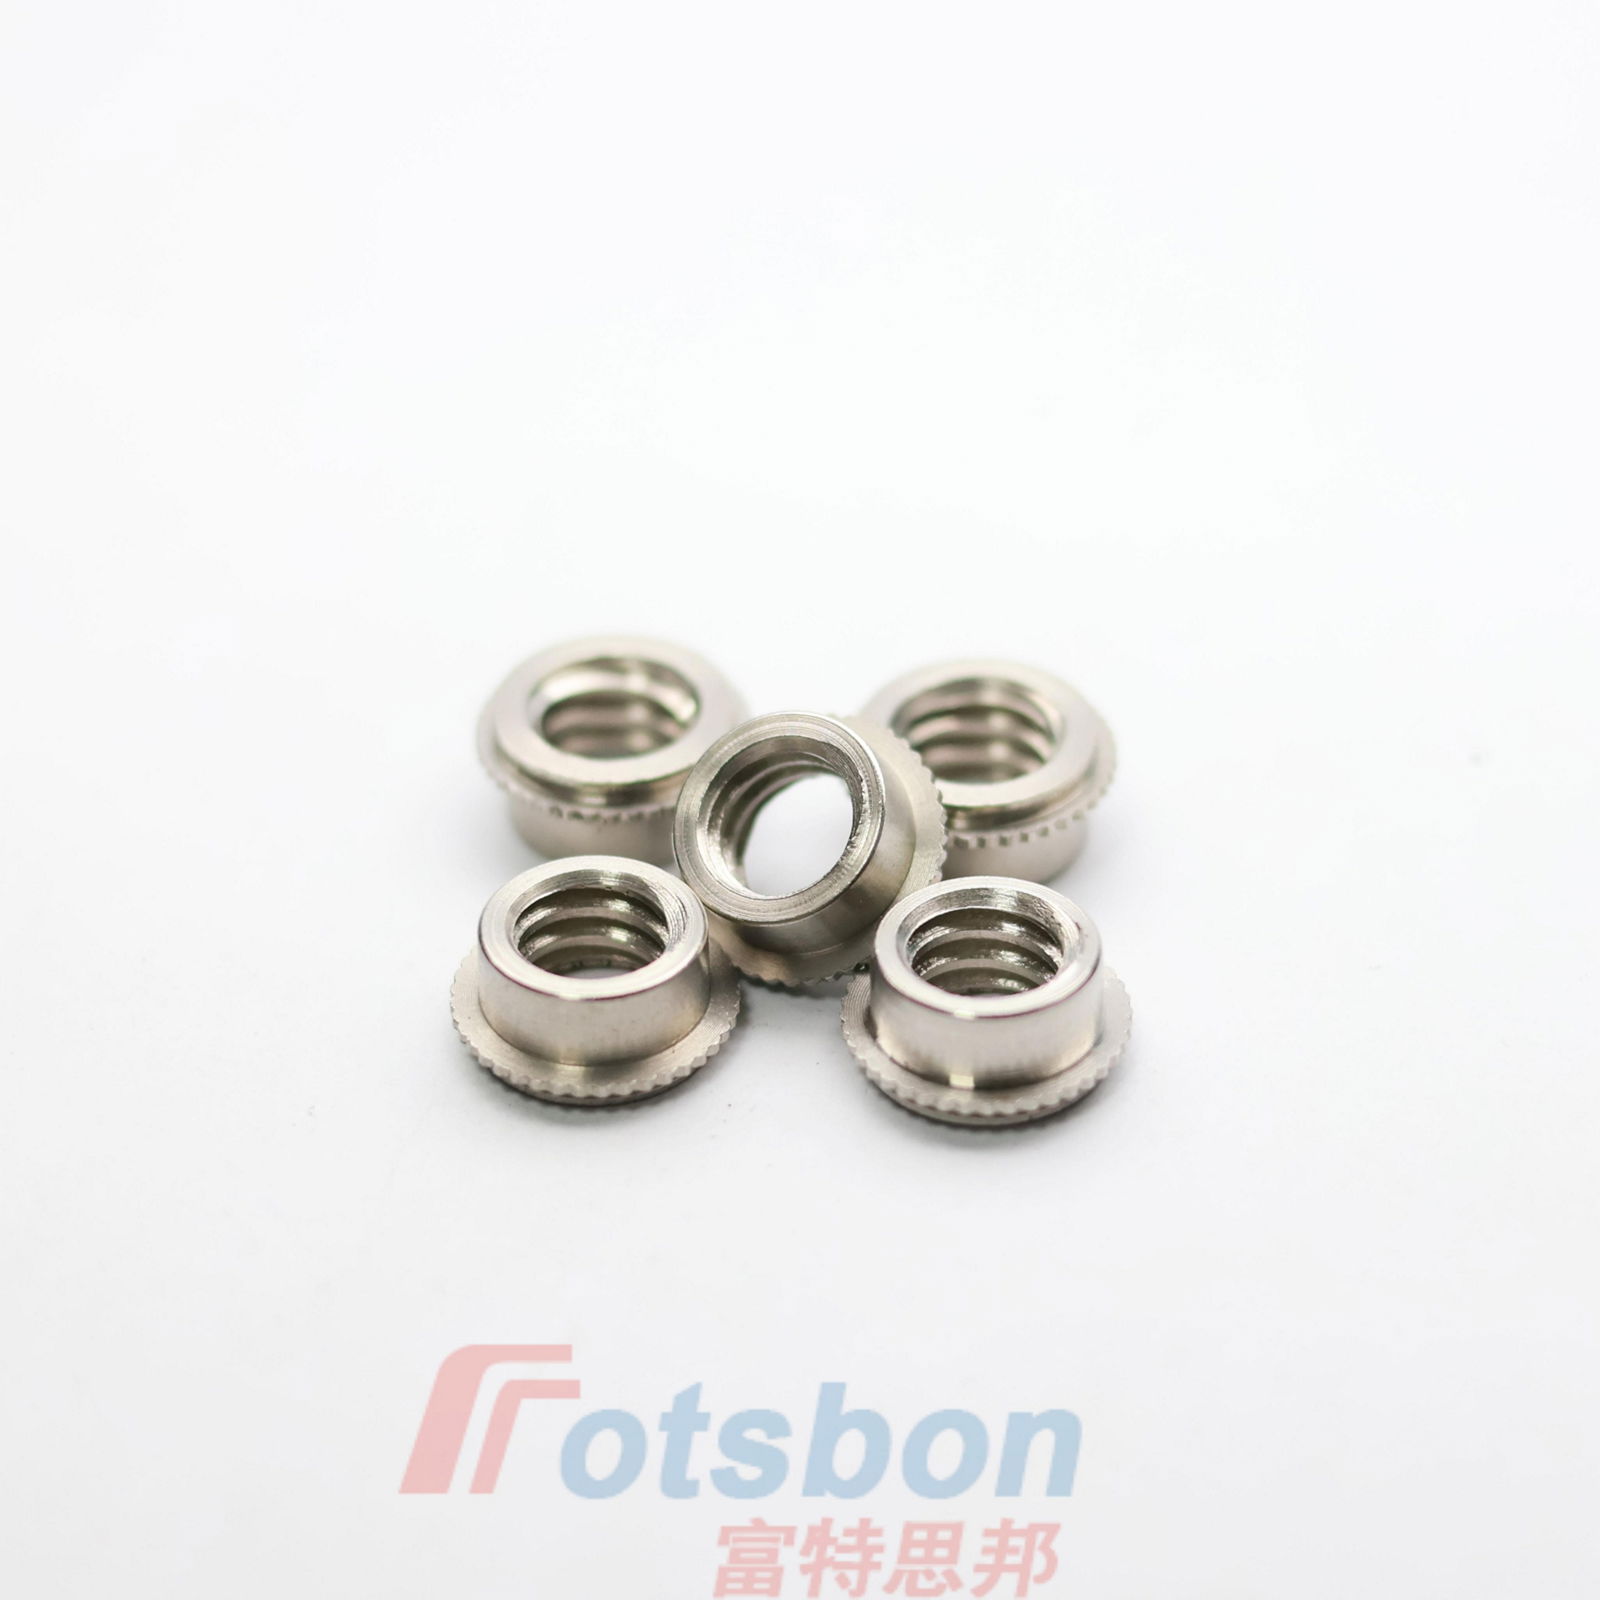 FEX-632Self locking Fasteners Stainless Steel Use On Sheet Self-Clinching Nuts 3